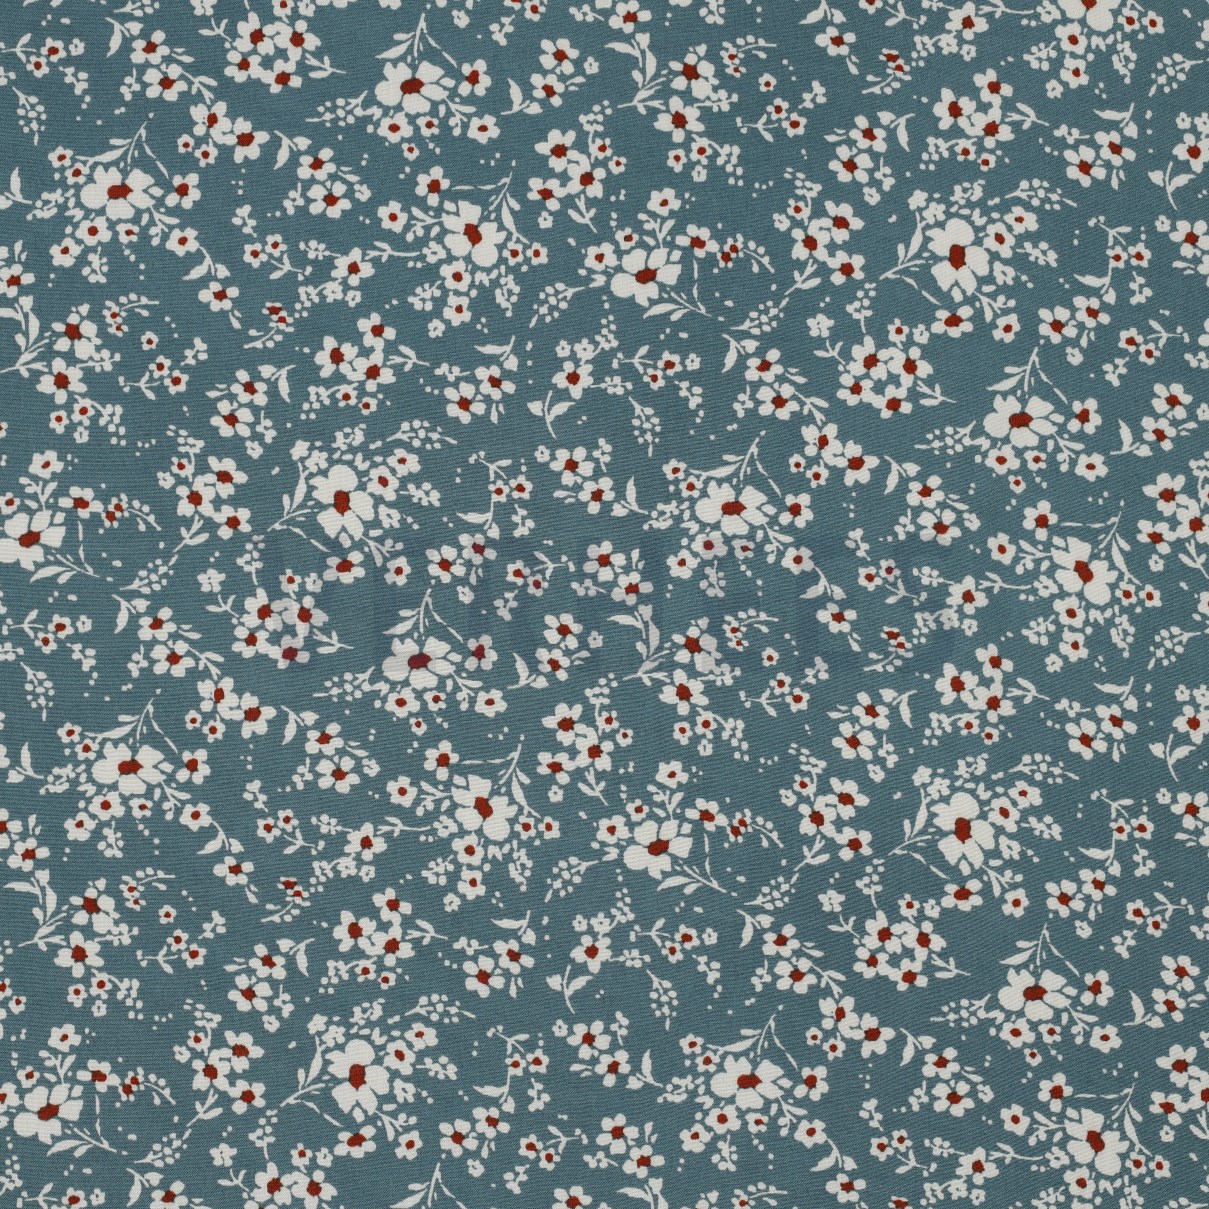 RADIANCE SMALL FLOWERS JEANS (high resolution)